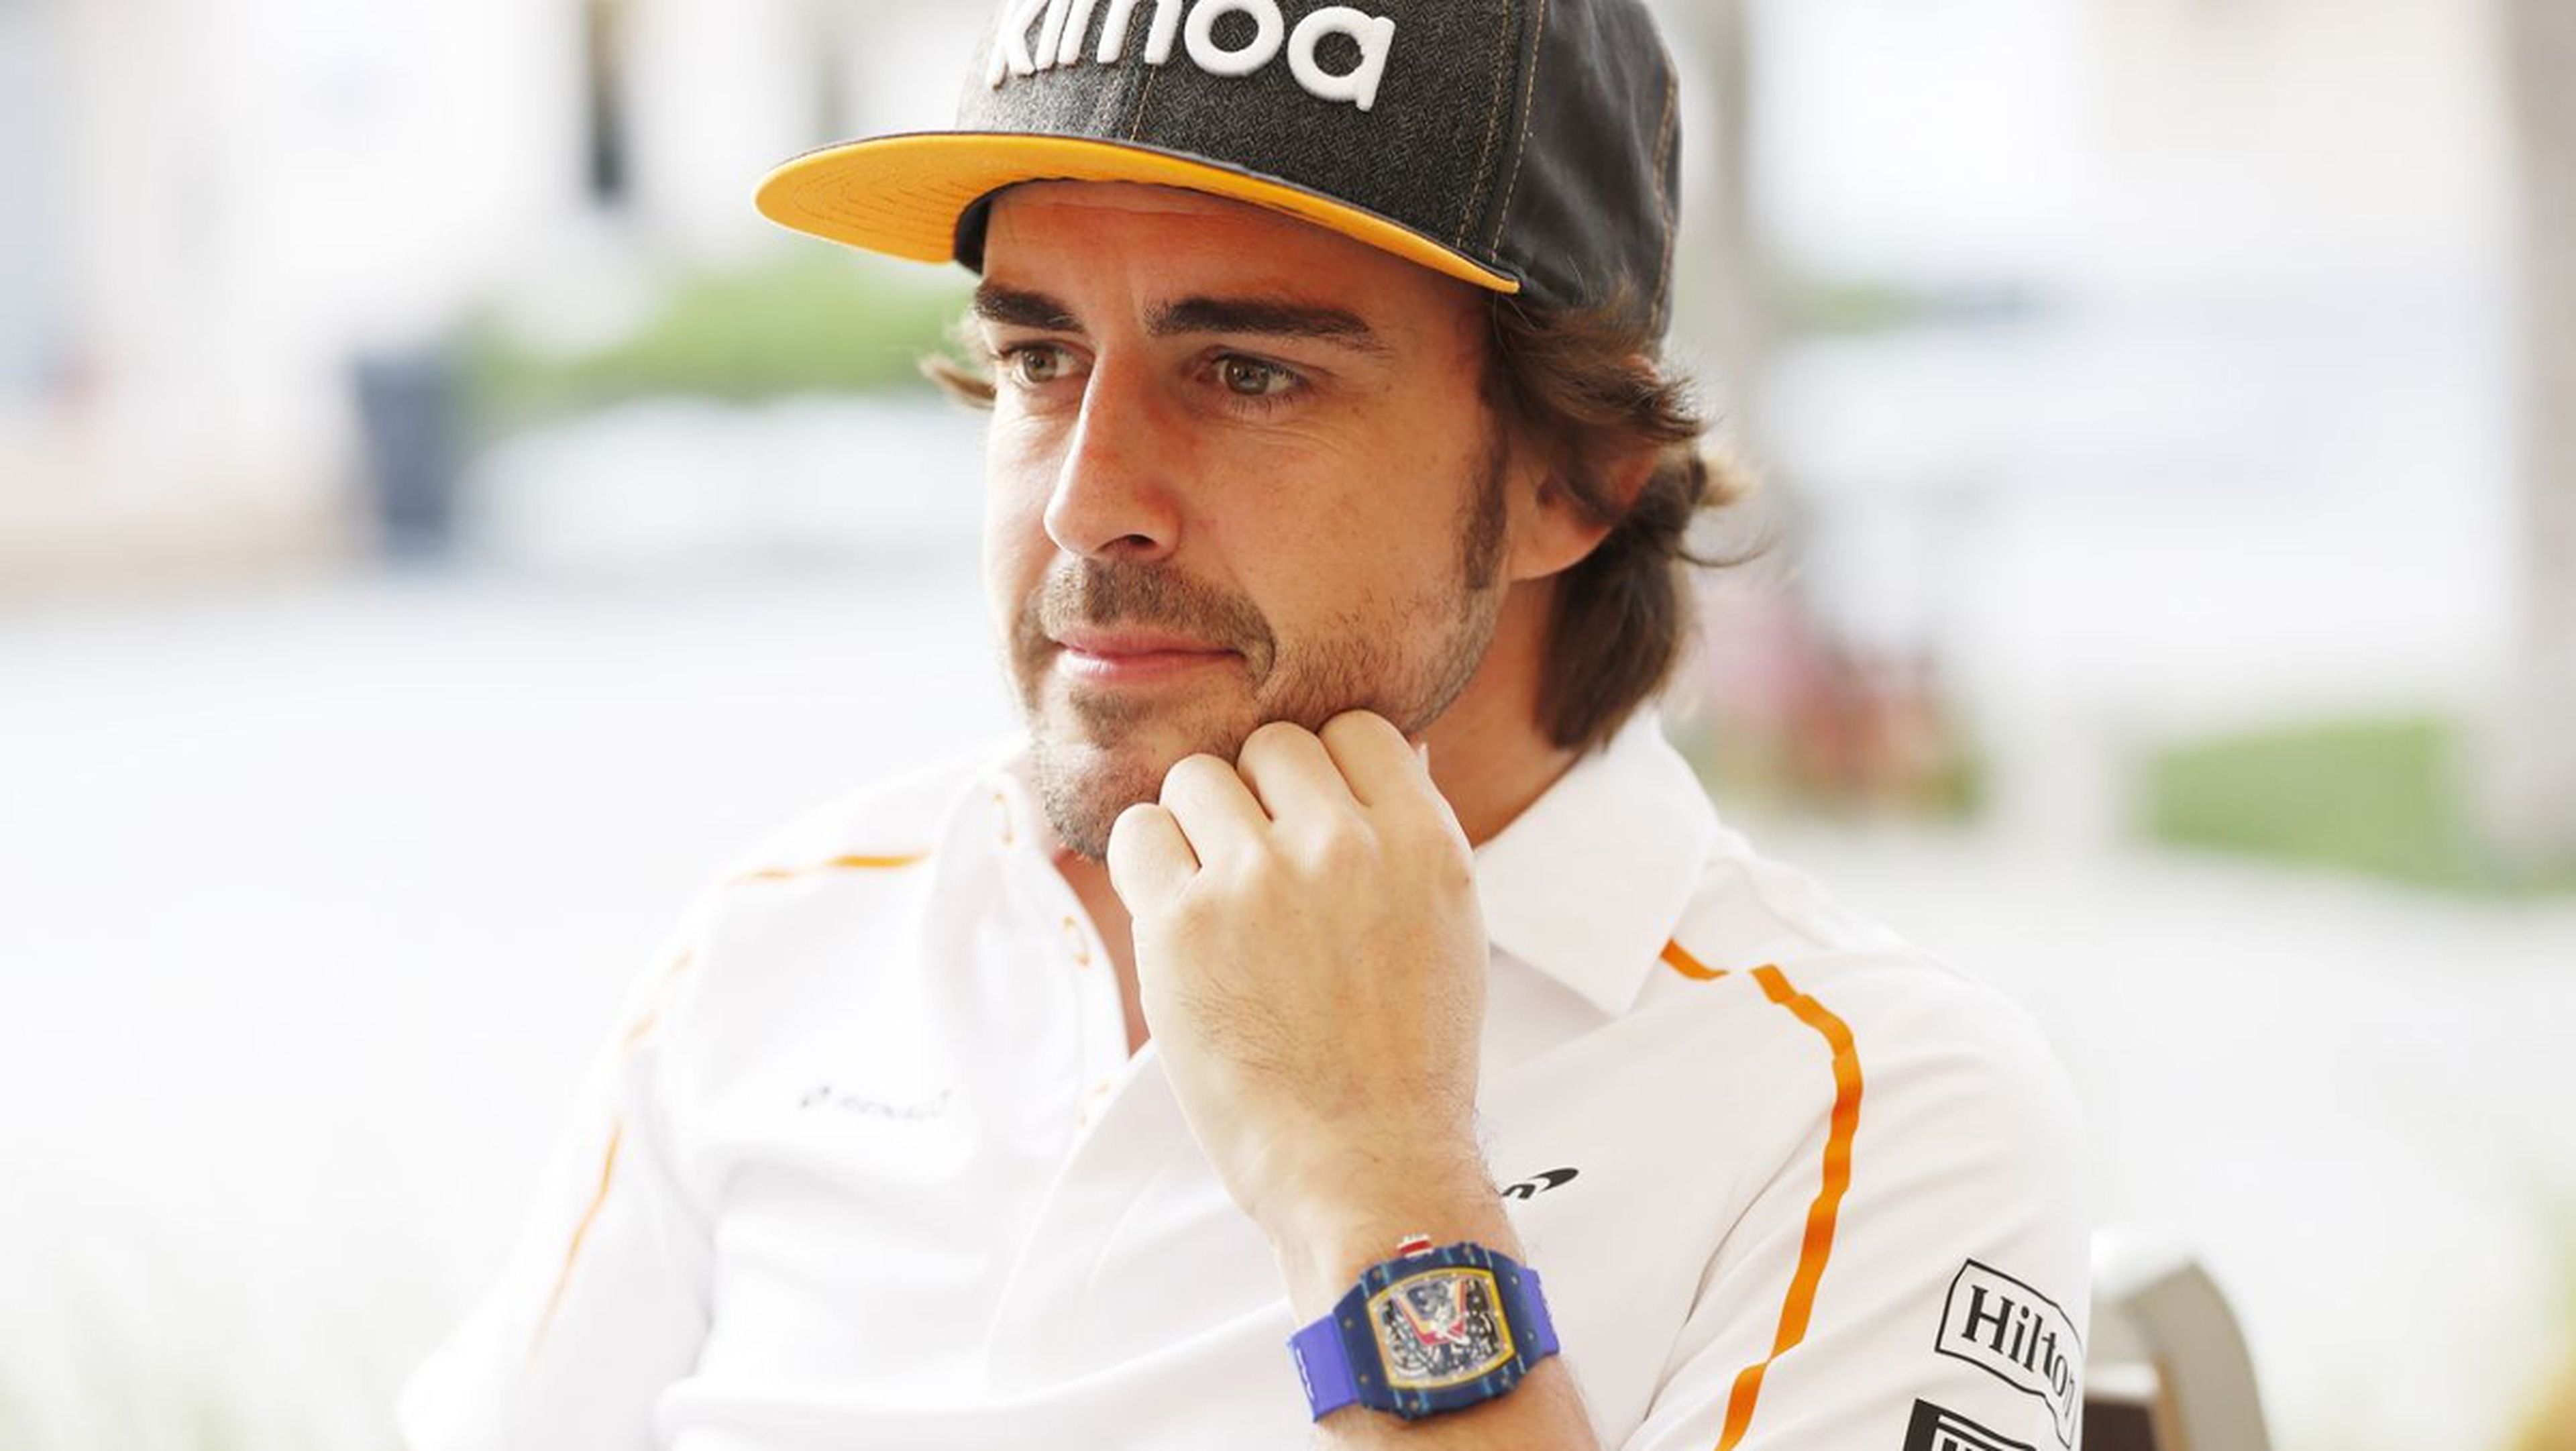 Peluco Richard Mille 67-02 Alonso